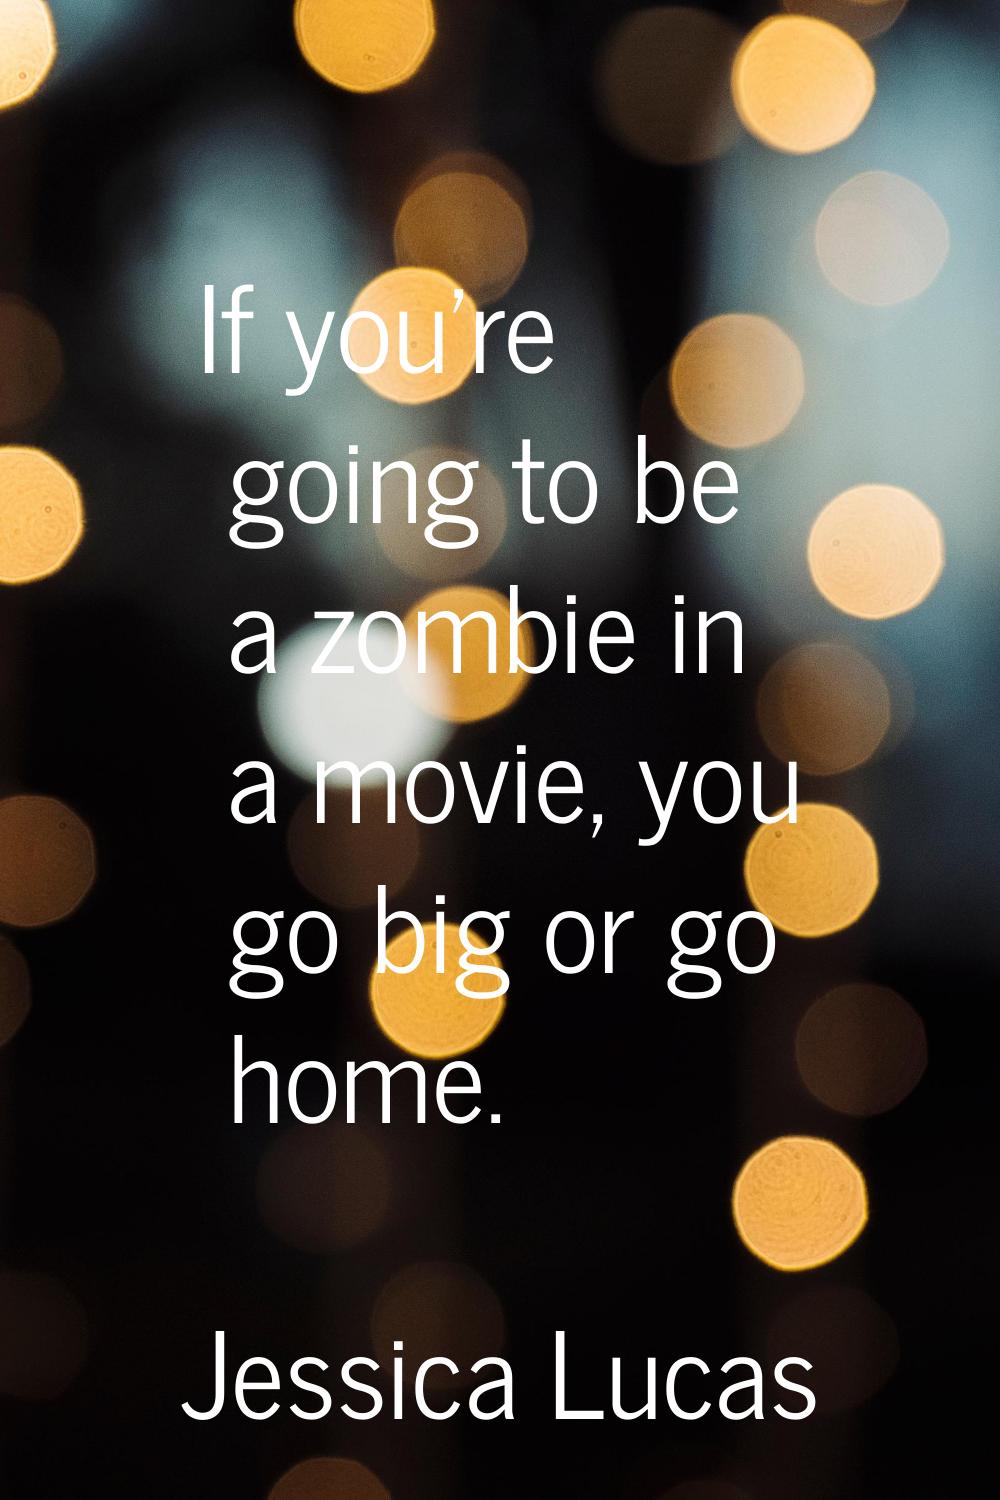 If you're going to be a zombie in a movie, you go big or go home.